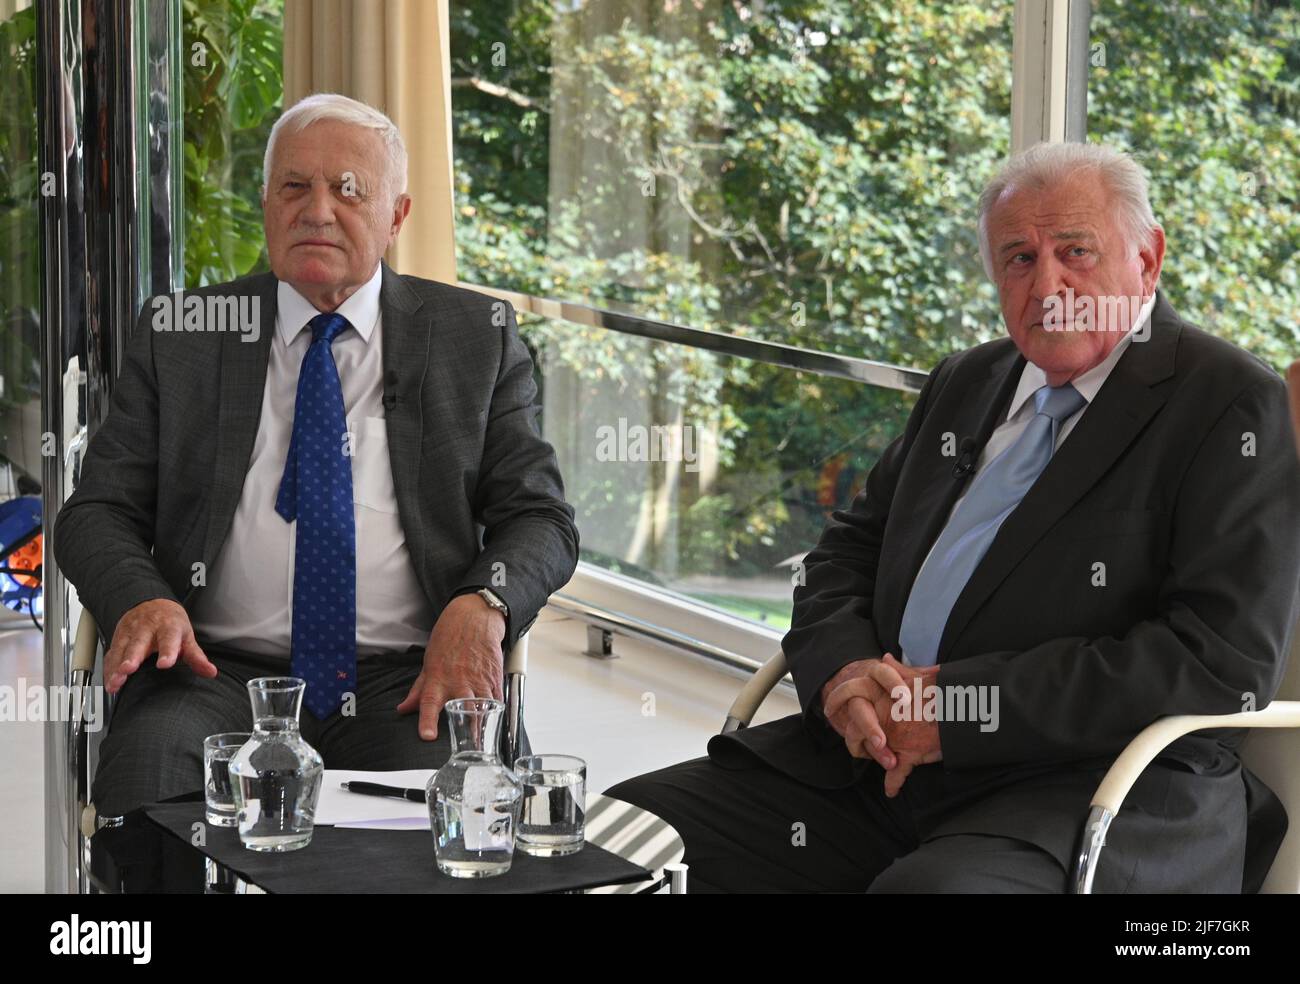 Brno, Czech Republic. 26th June, 2022. Former Czech Prime Minister Vaclav Klaus, left, and former Slovak Prime Minister Vladimir Meciar, right, are seen during their discussion at Tugendhat villa in Brno, Czech Republic, on June 30, 2022, where they negotiated about split of Czechoslovakia 30 years ago. The discussion is organized by public Czech Radio (CRo) and Slovak TV (RTVS). Credit: Igor Zehl/CTK Photo/Alamy Live News Stock Photo